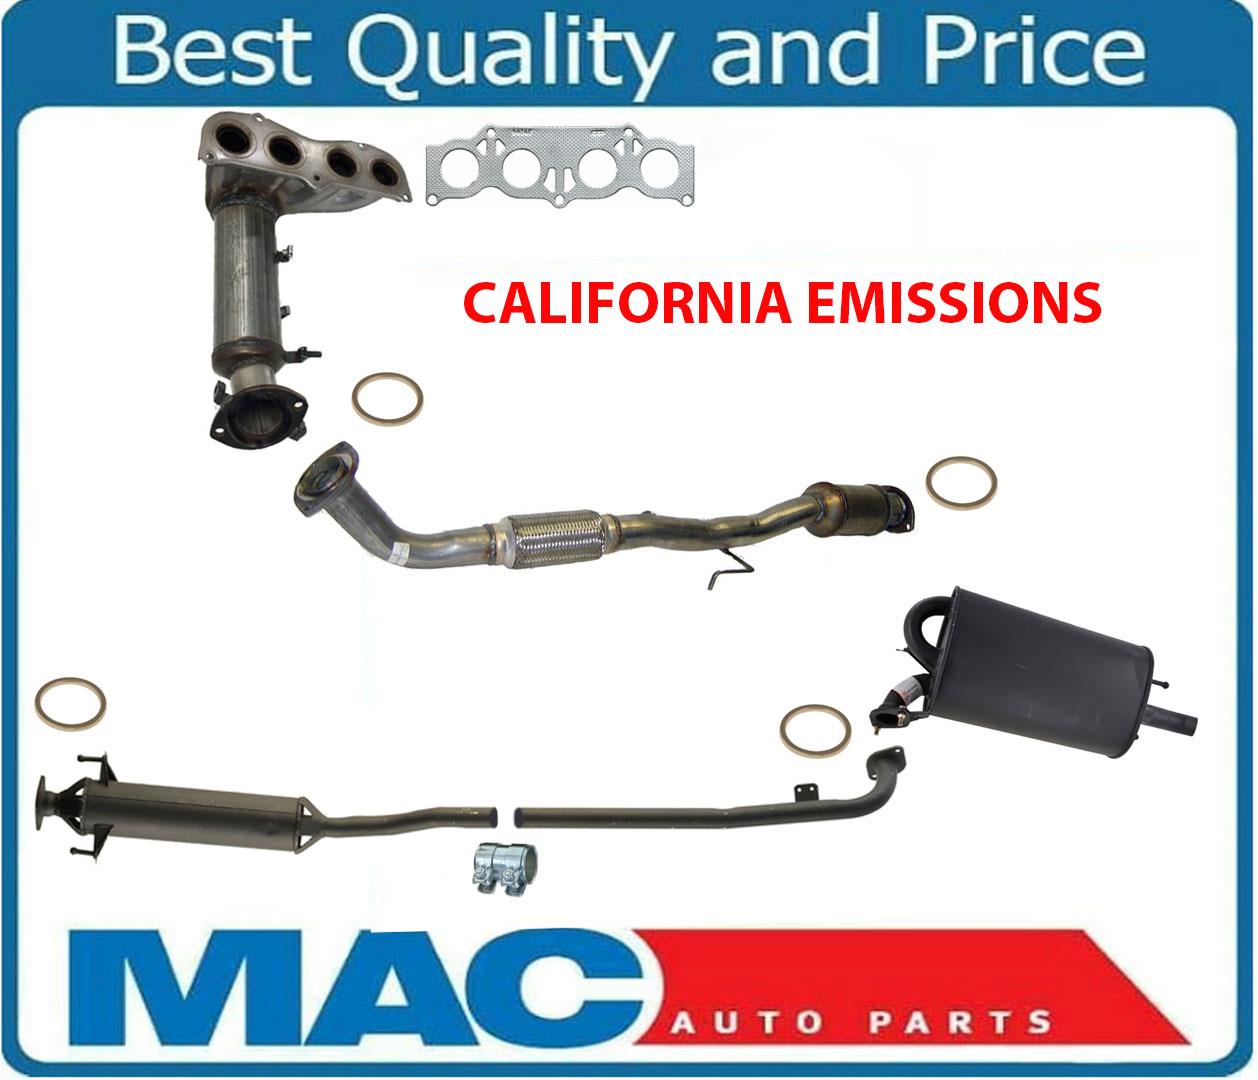 Full Exhaust System For Toyota Camry 03-05 2.4L With California